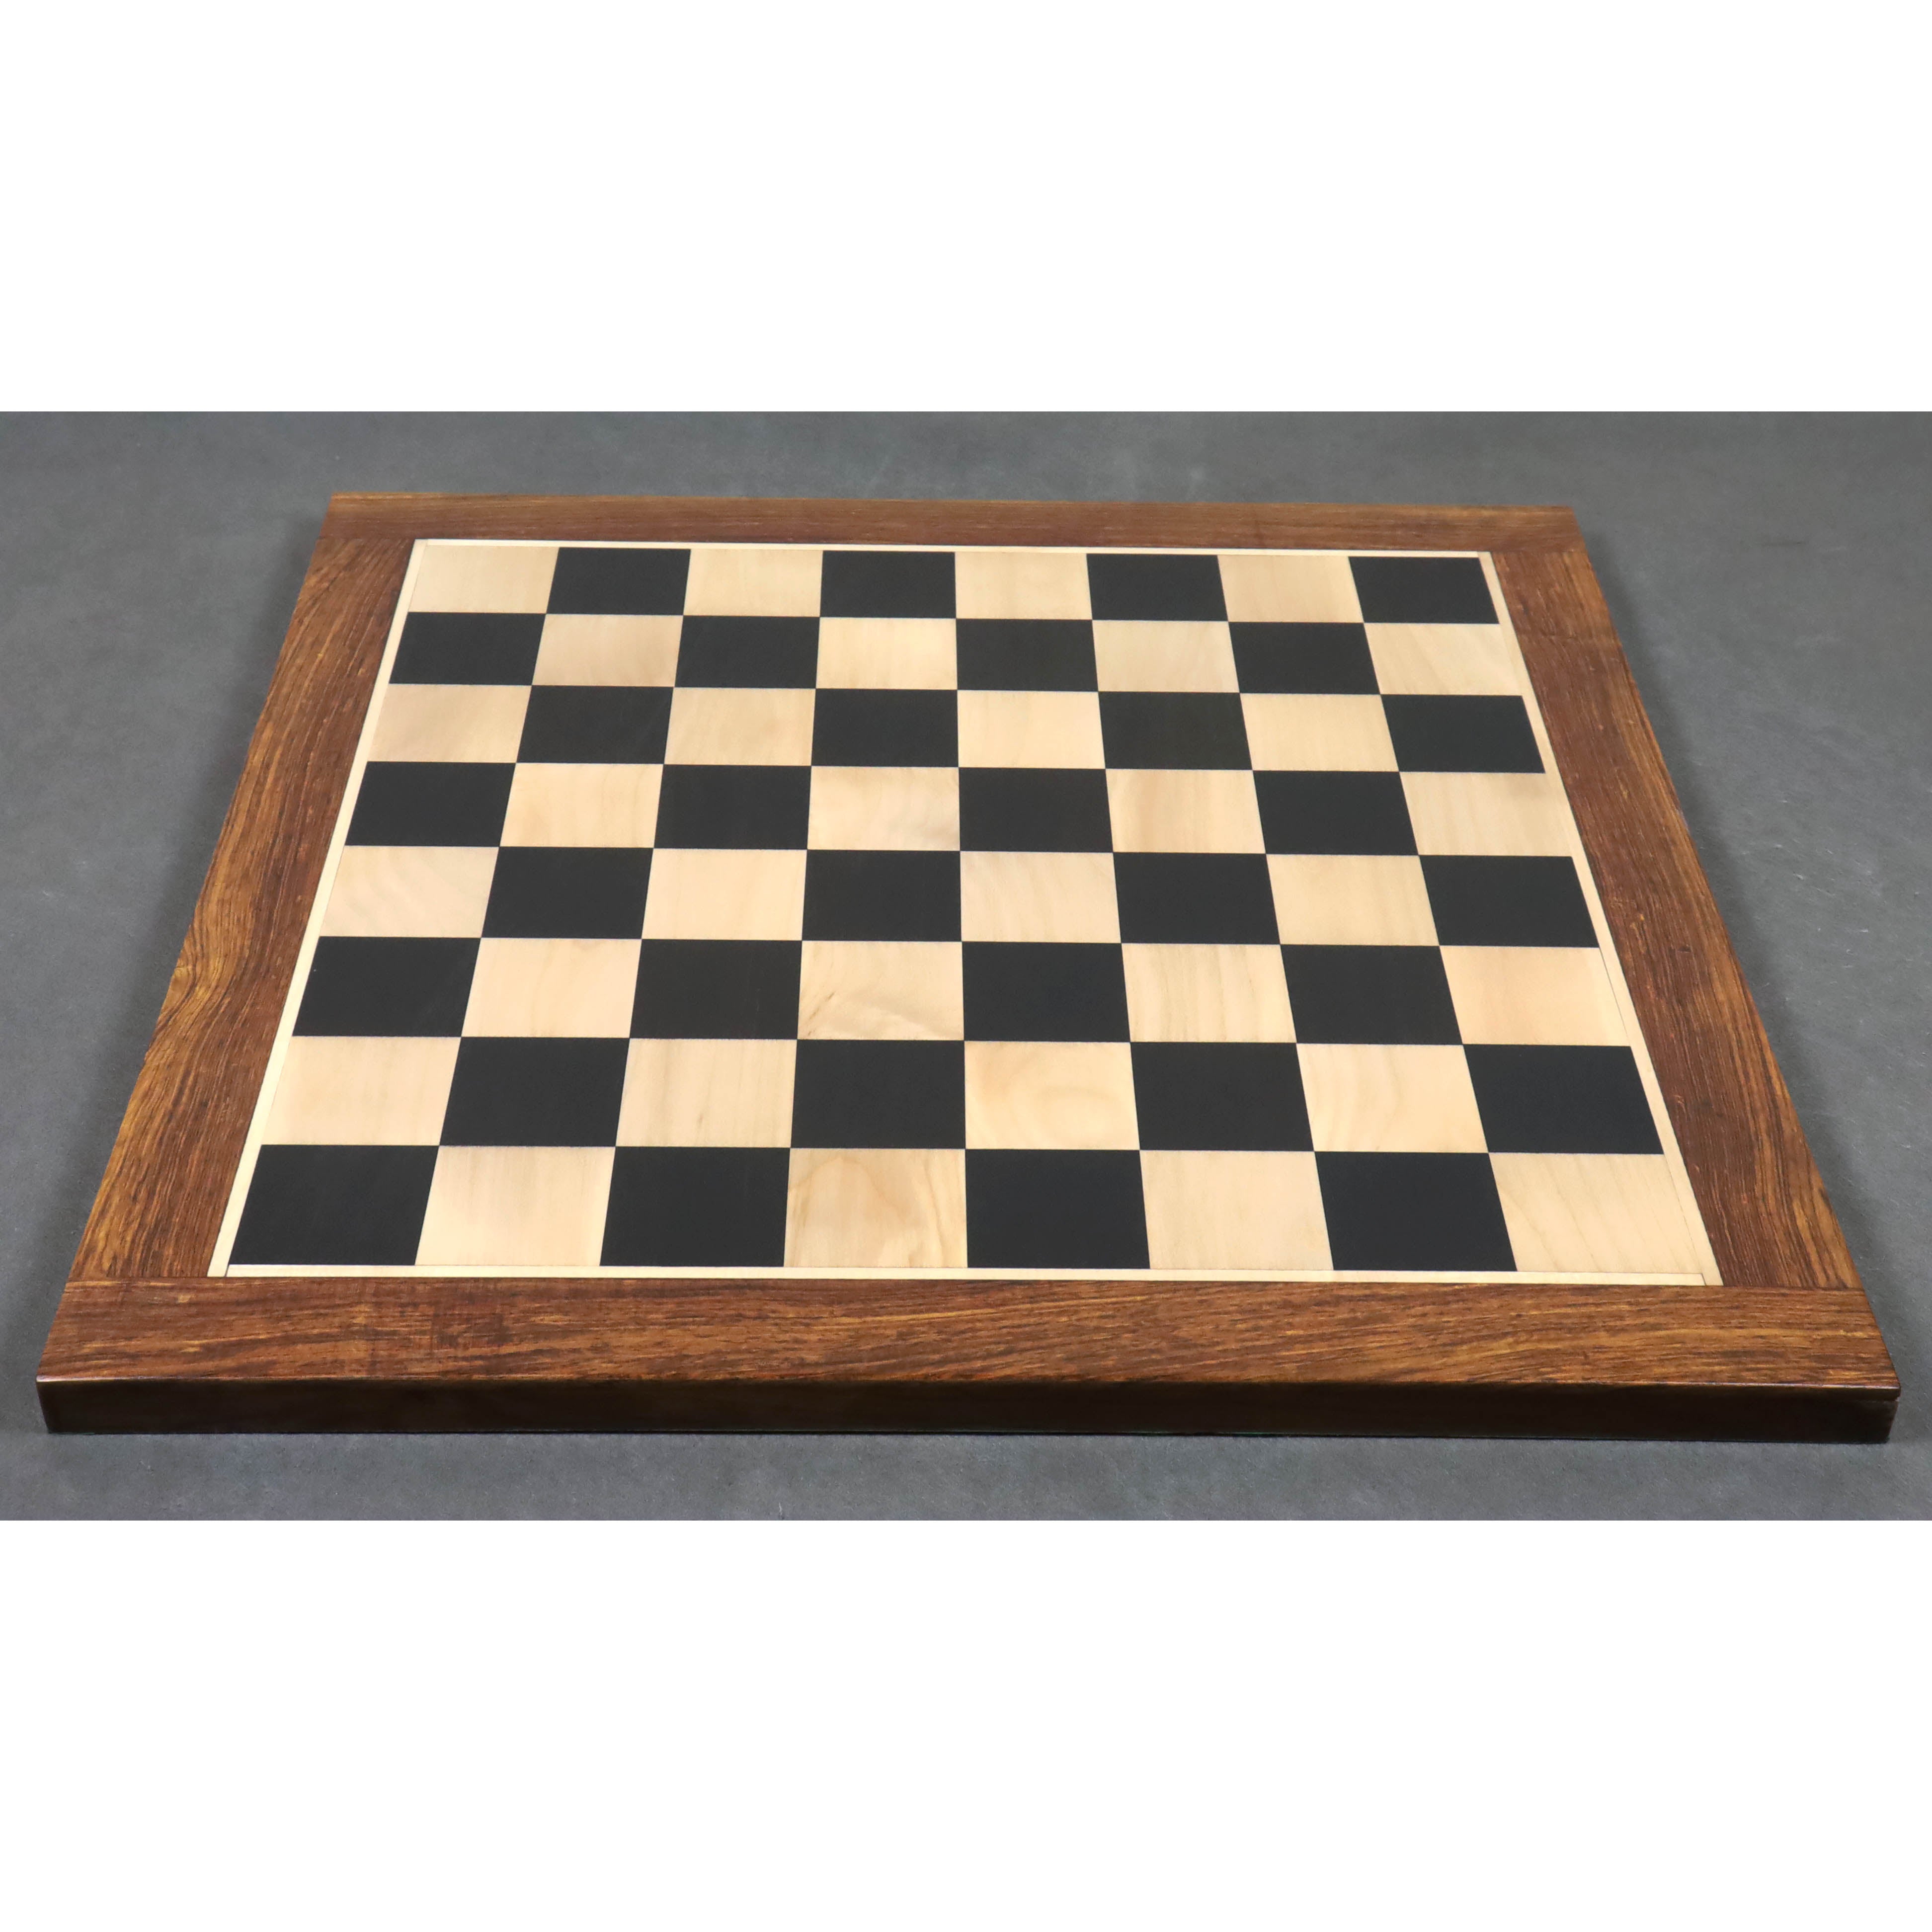 4.2" American Staunton Luxury Chess Pieces - Weighted Boxwood with 23" Large Ebony & Maple Wood Chessboard - sheesham borders and Leatherette Coffer Storage Box